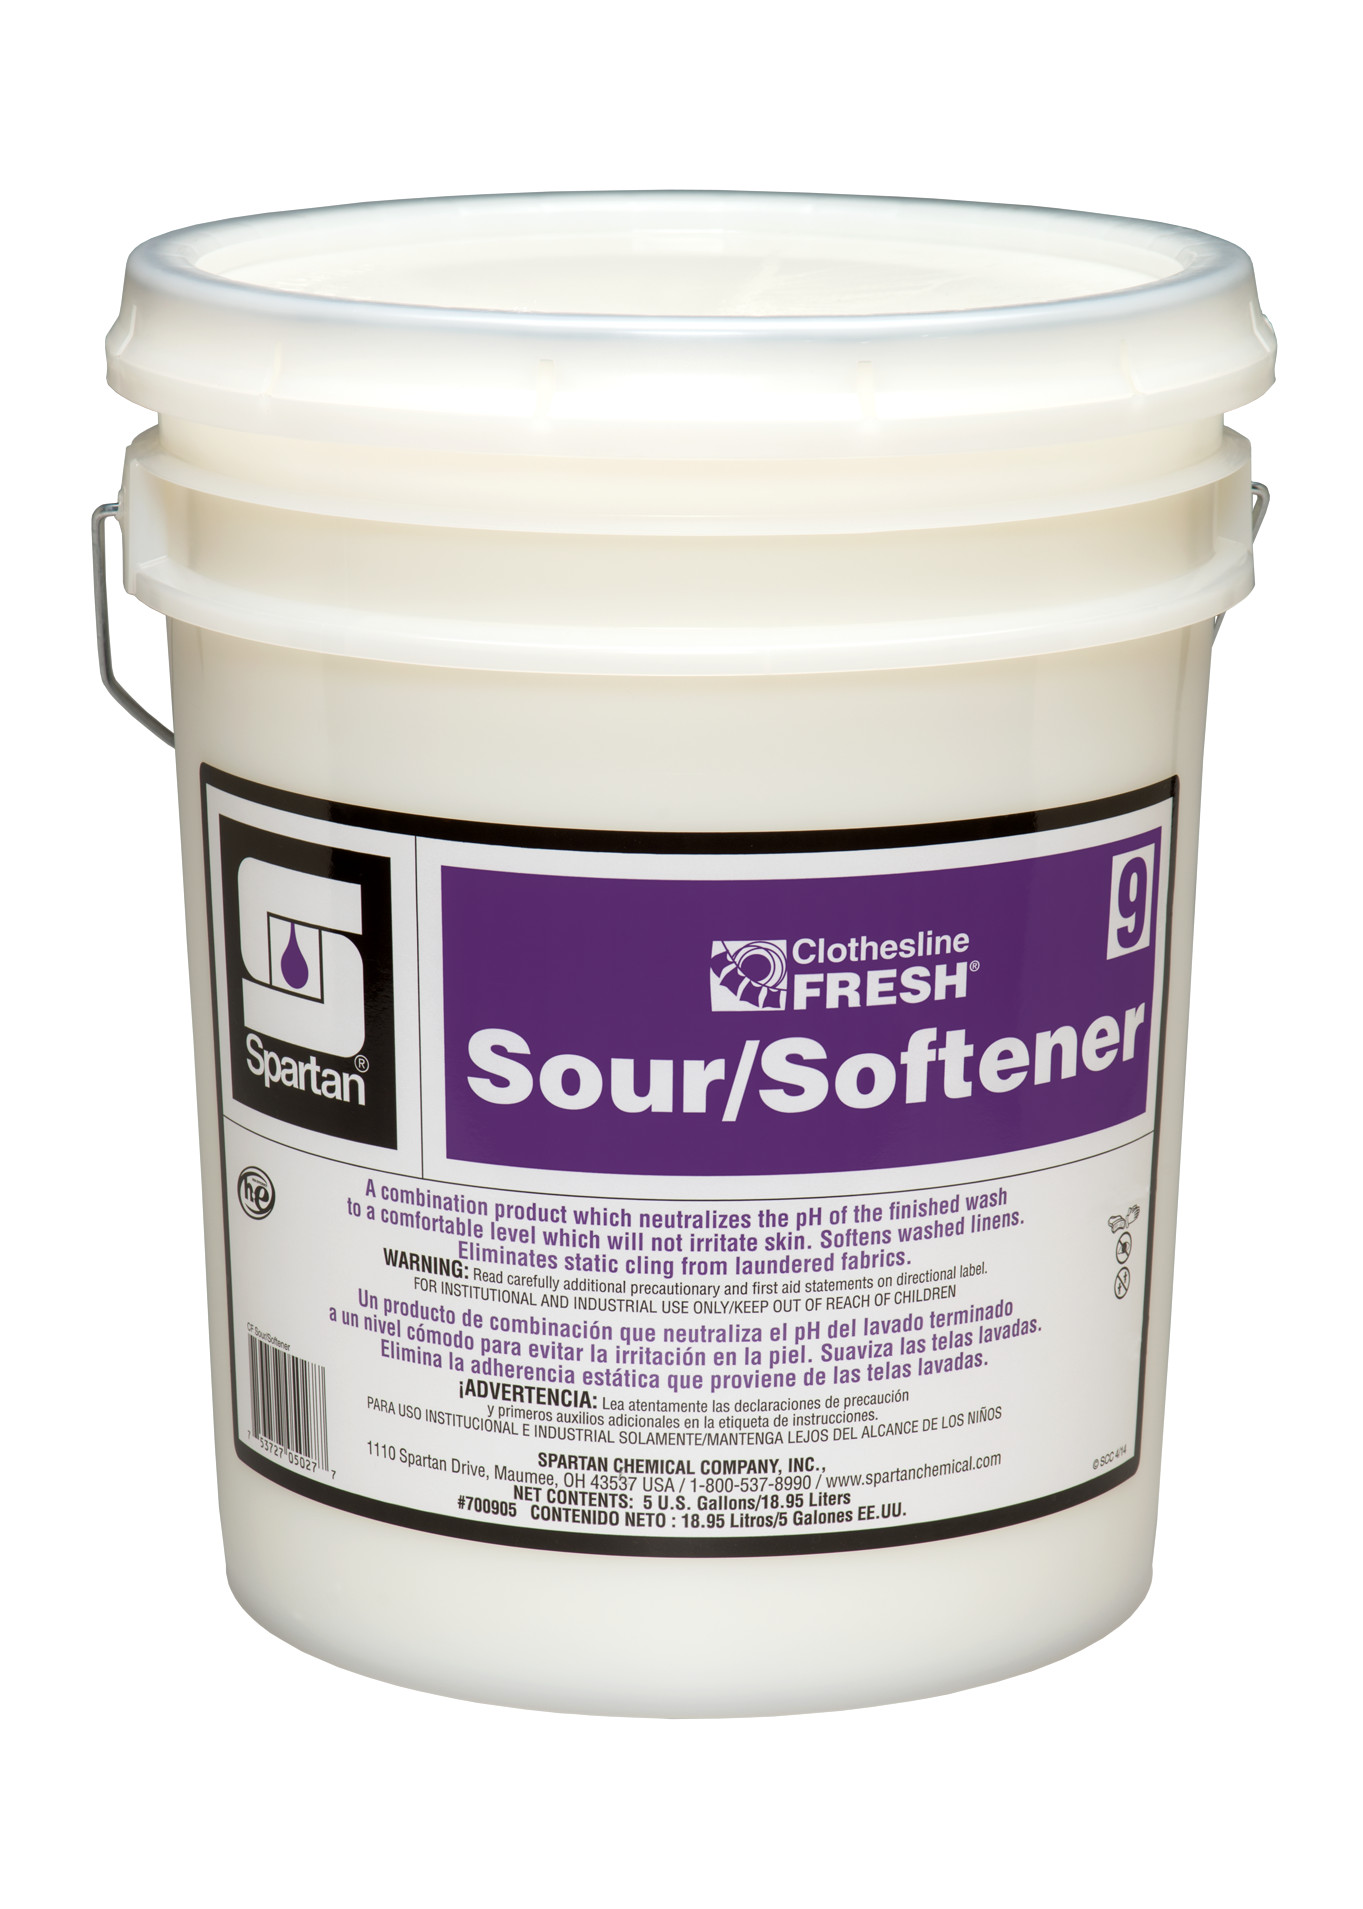 Spartan Chemical Company Clothesline Fresh Sour/Softener 9, 5 GAL PAIL